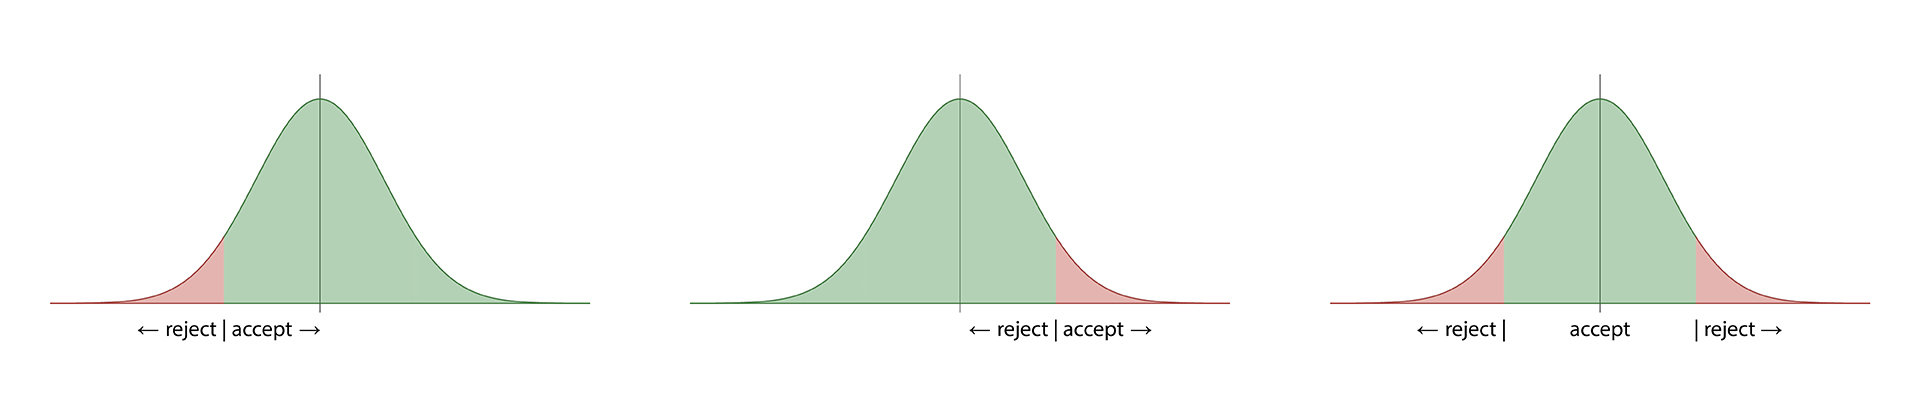 Appropriate rejection region(s) for a one- or two-tail test.